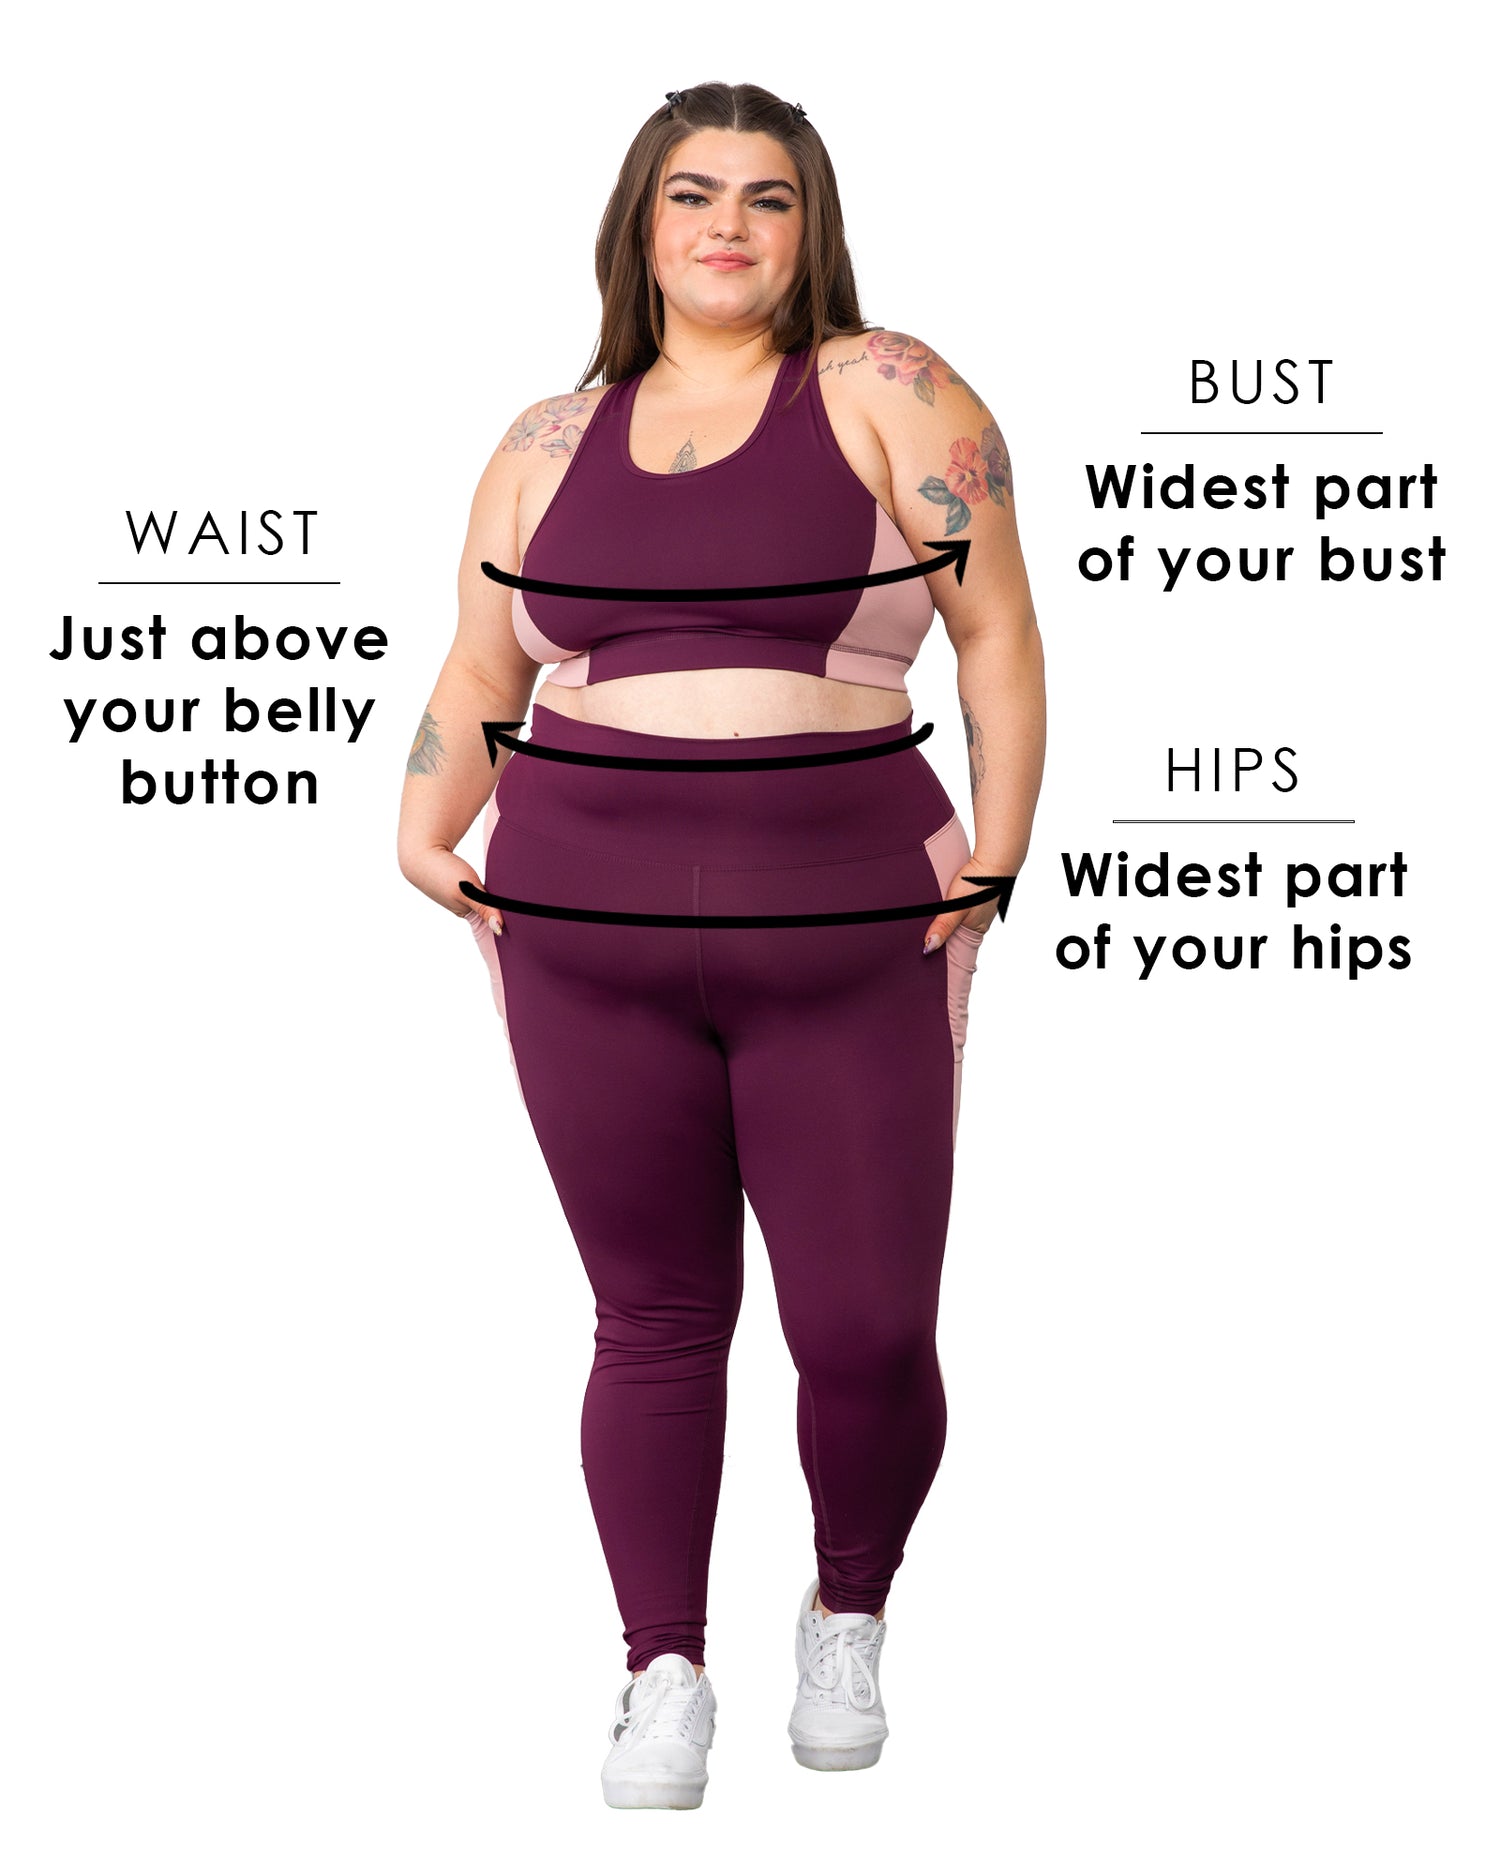 Women's Size Guide, Fitting & Measurements